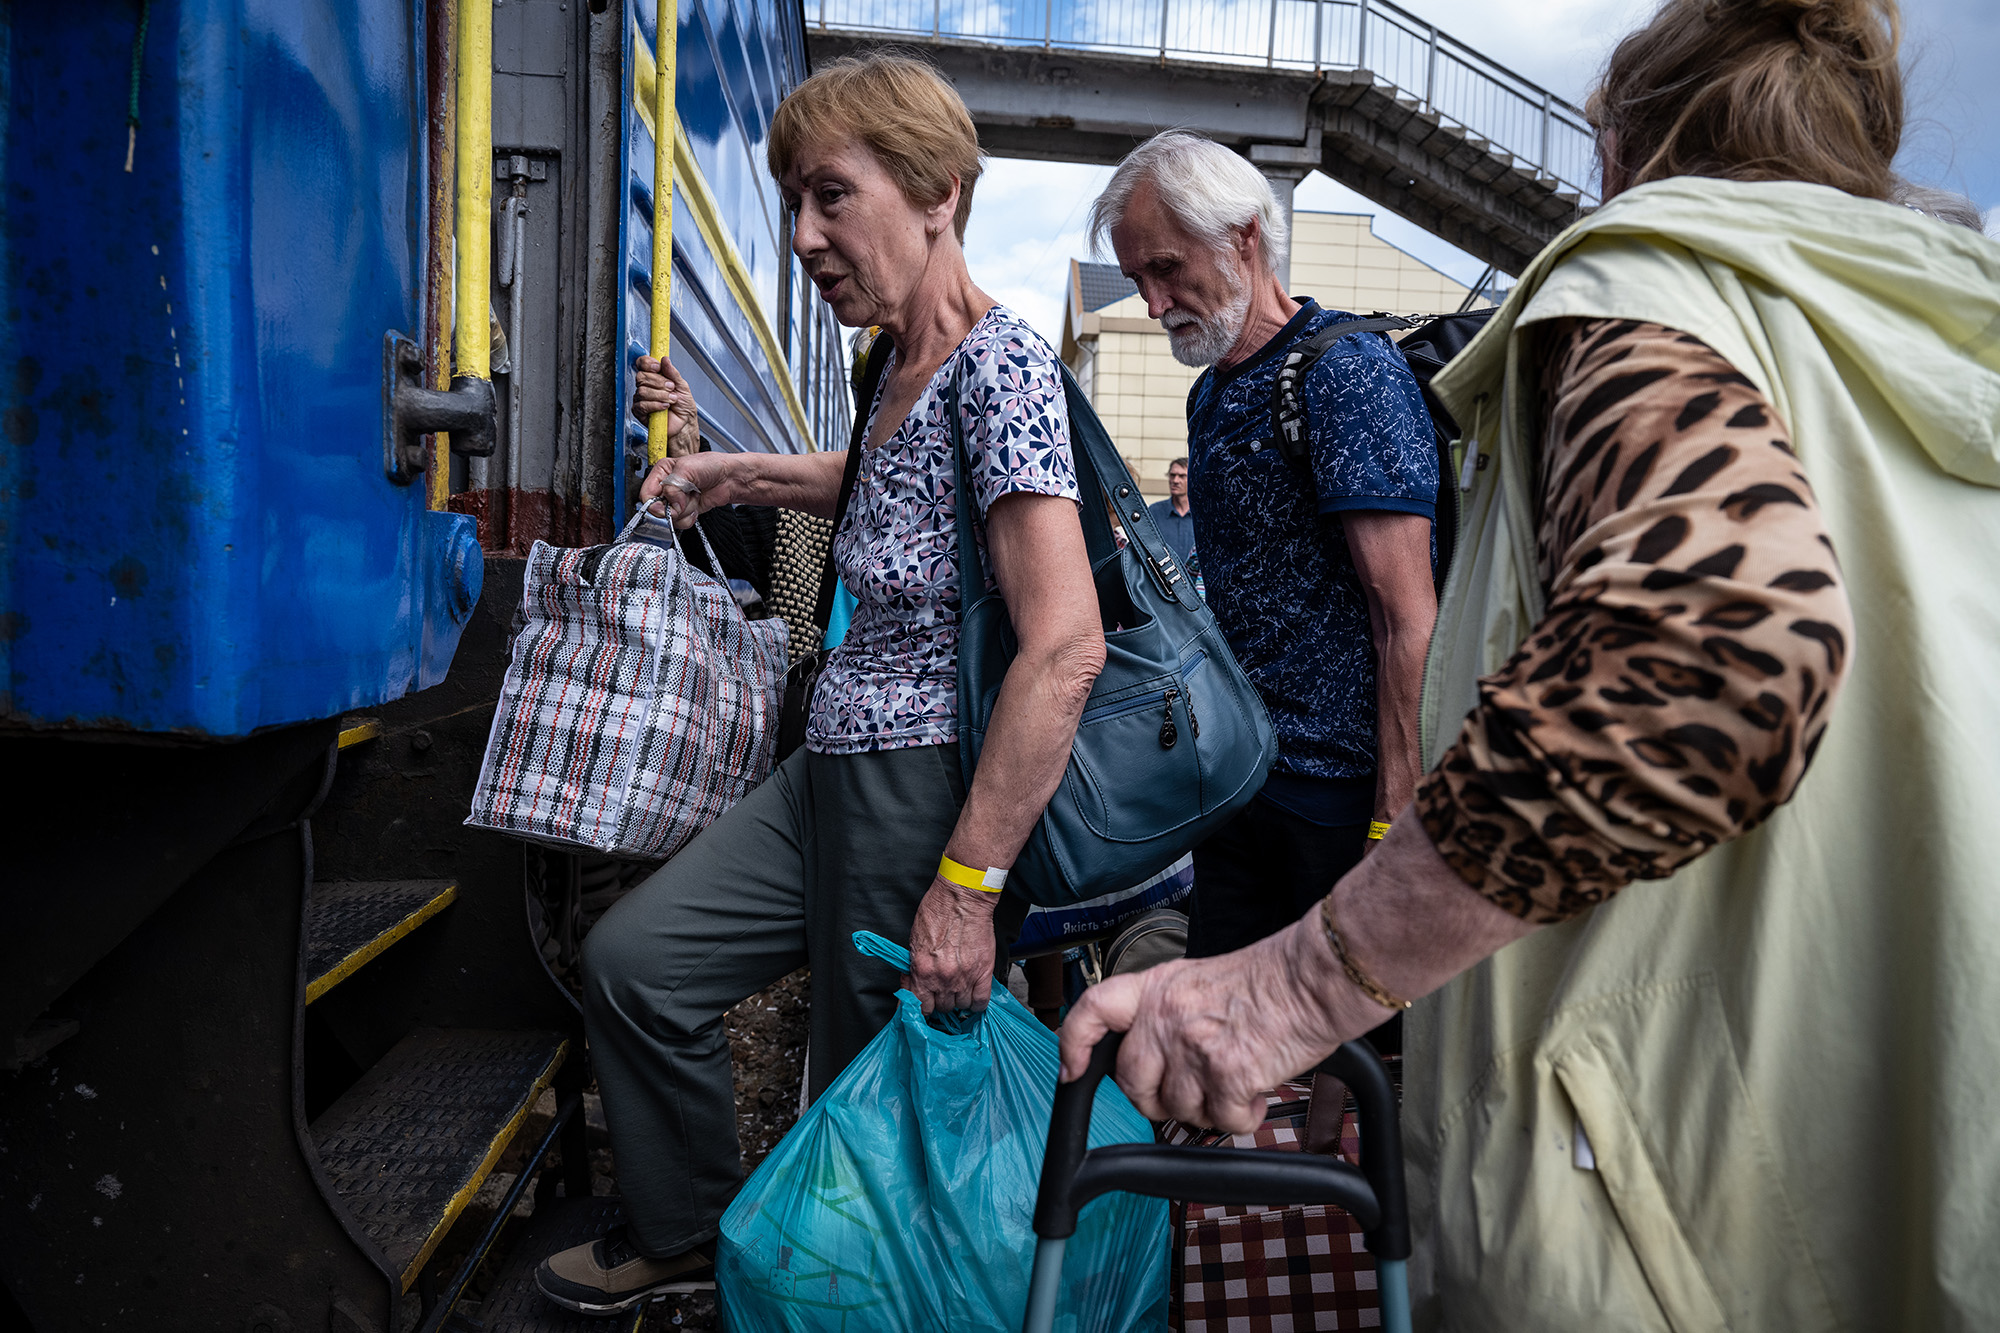 Scores of Ukrainian evacuees from the embattled city of Lysychansk board an evacuation train to safer cities to the west, from the train station in Pokrovsk, Ukraine, on June 24.